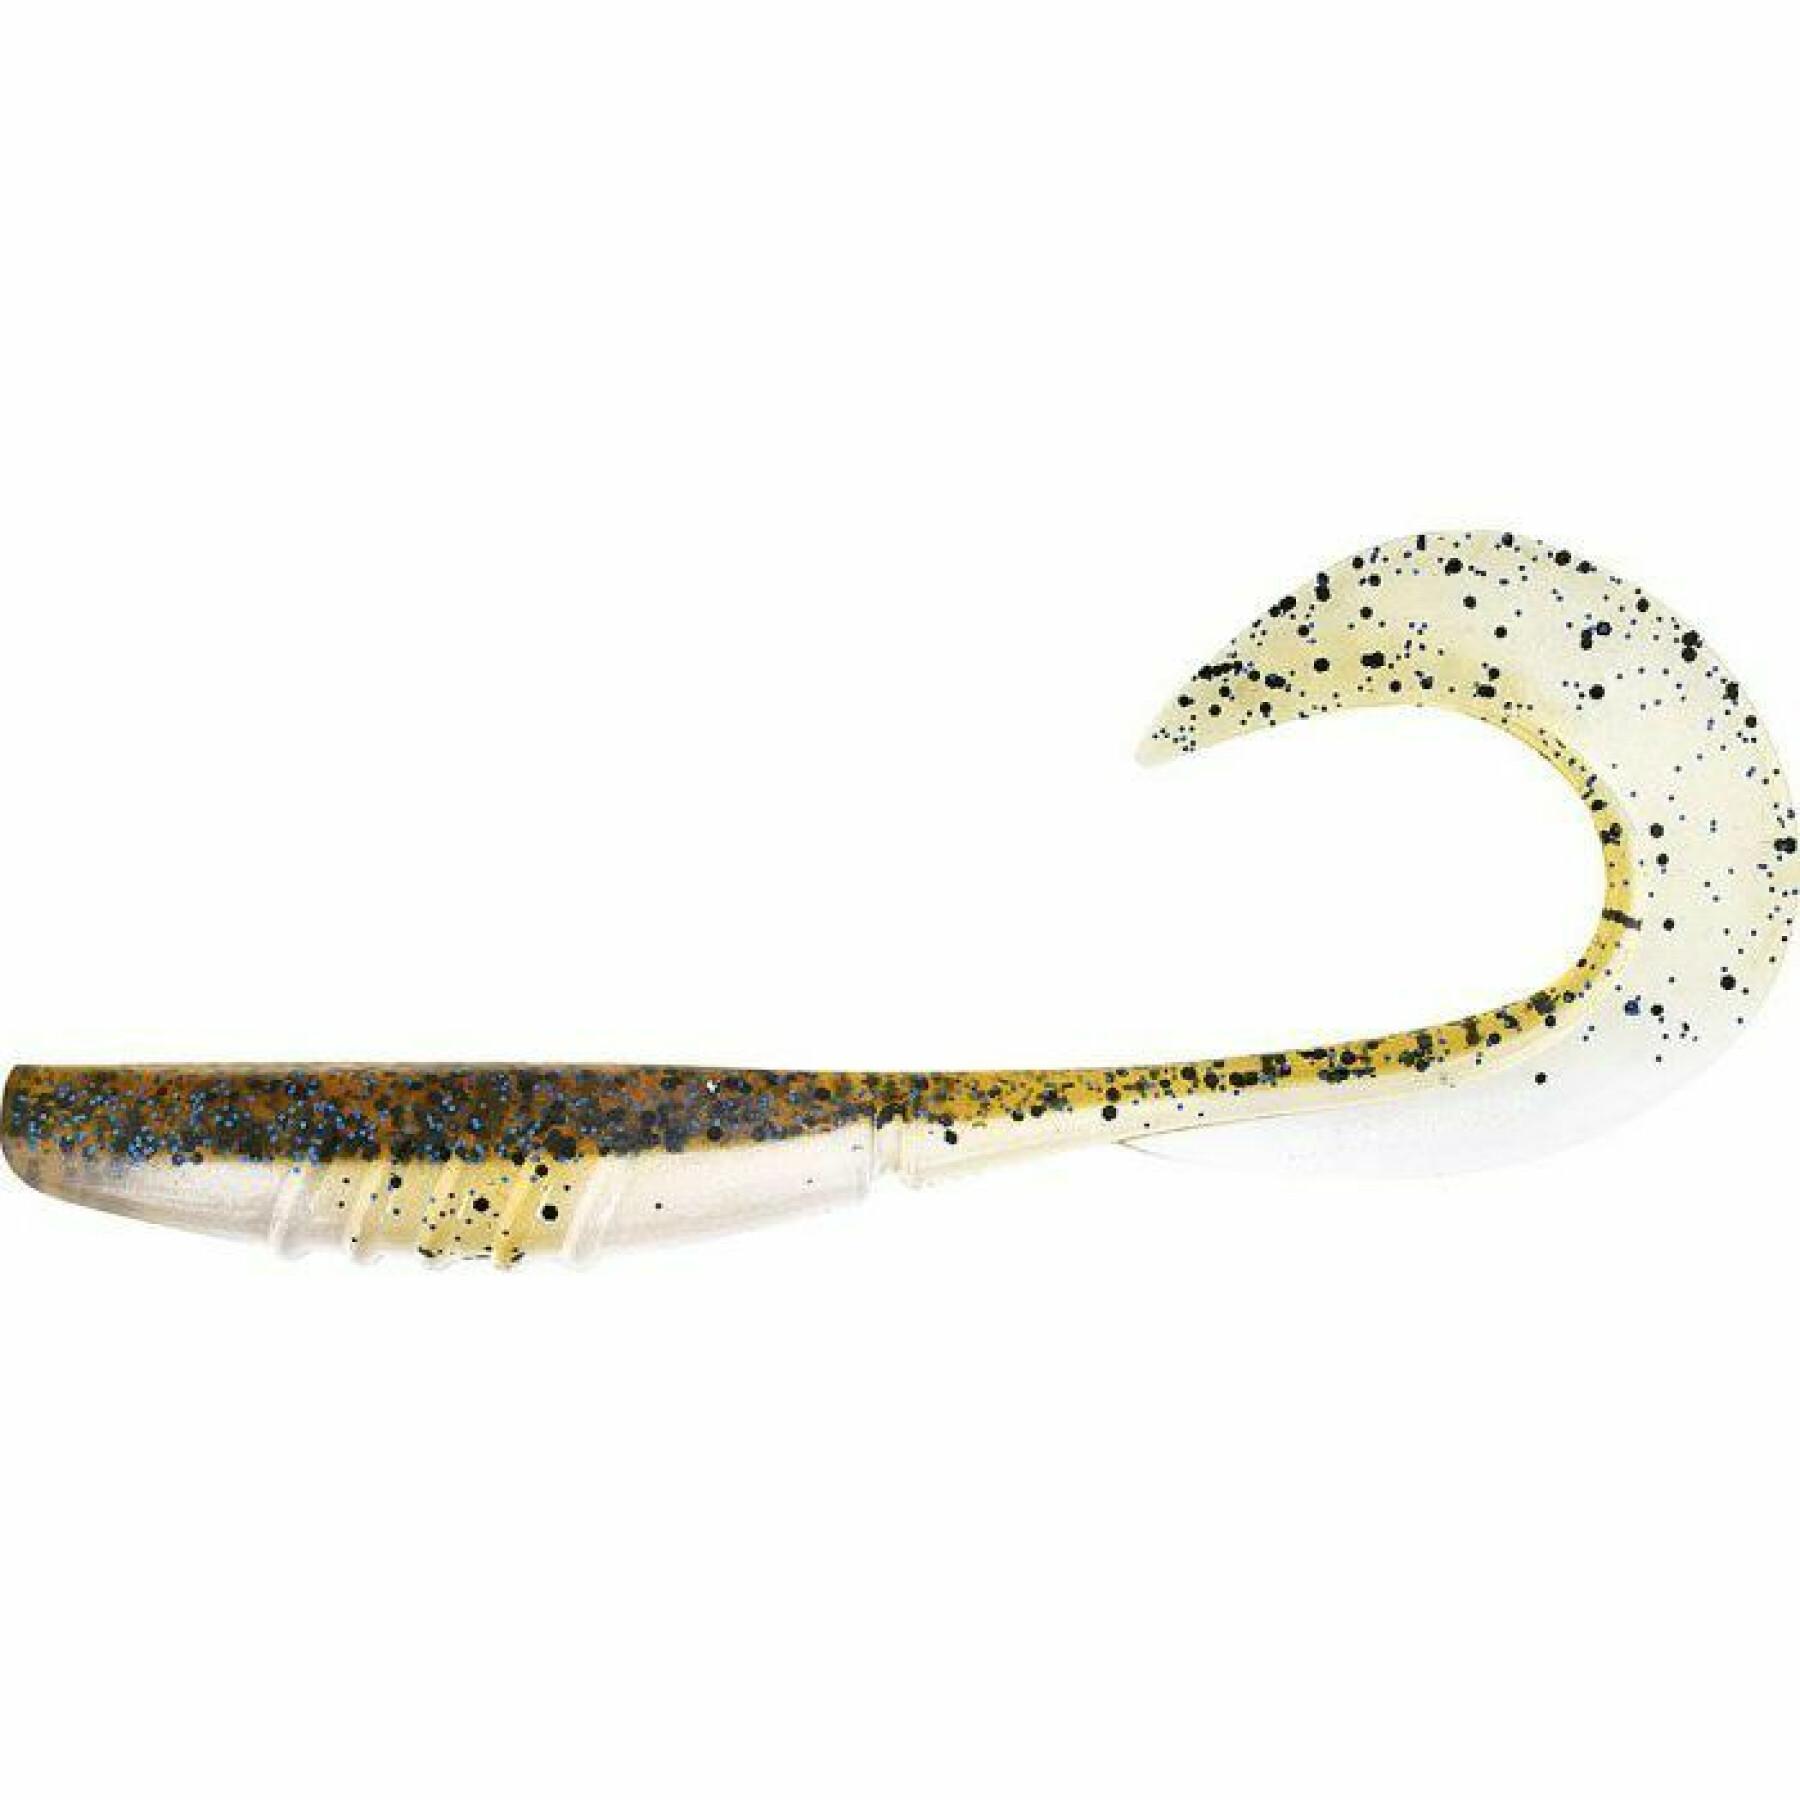 Engodos Megabass X-Layer Curly 7" (x4)